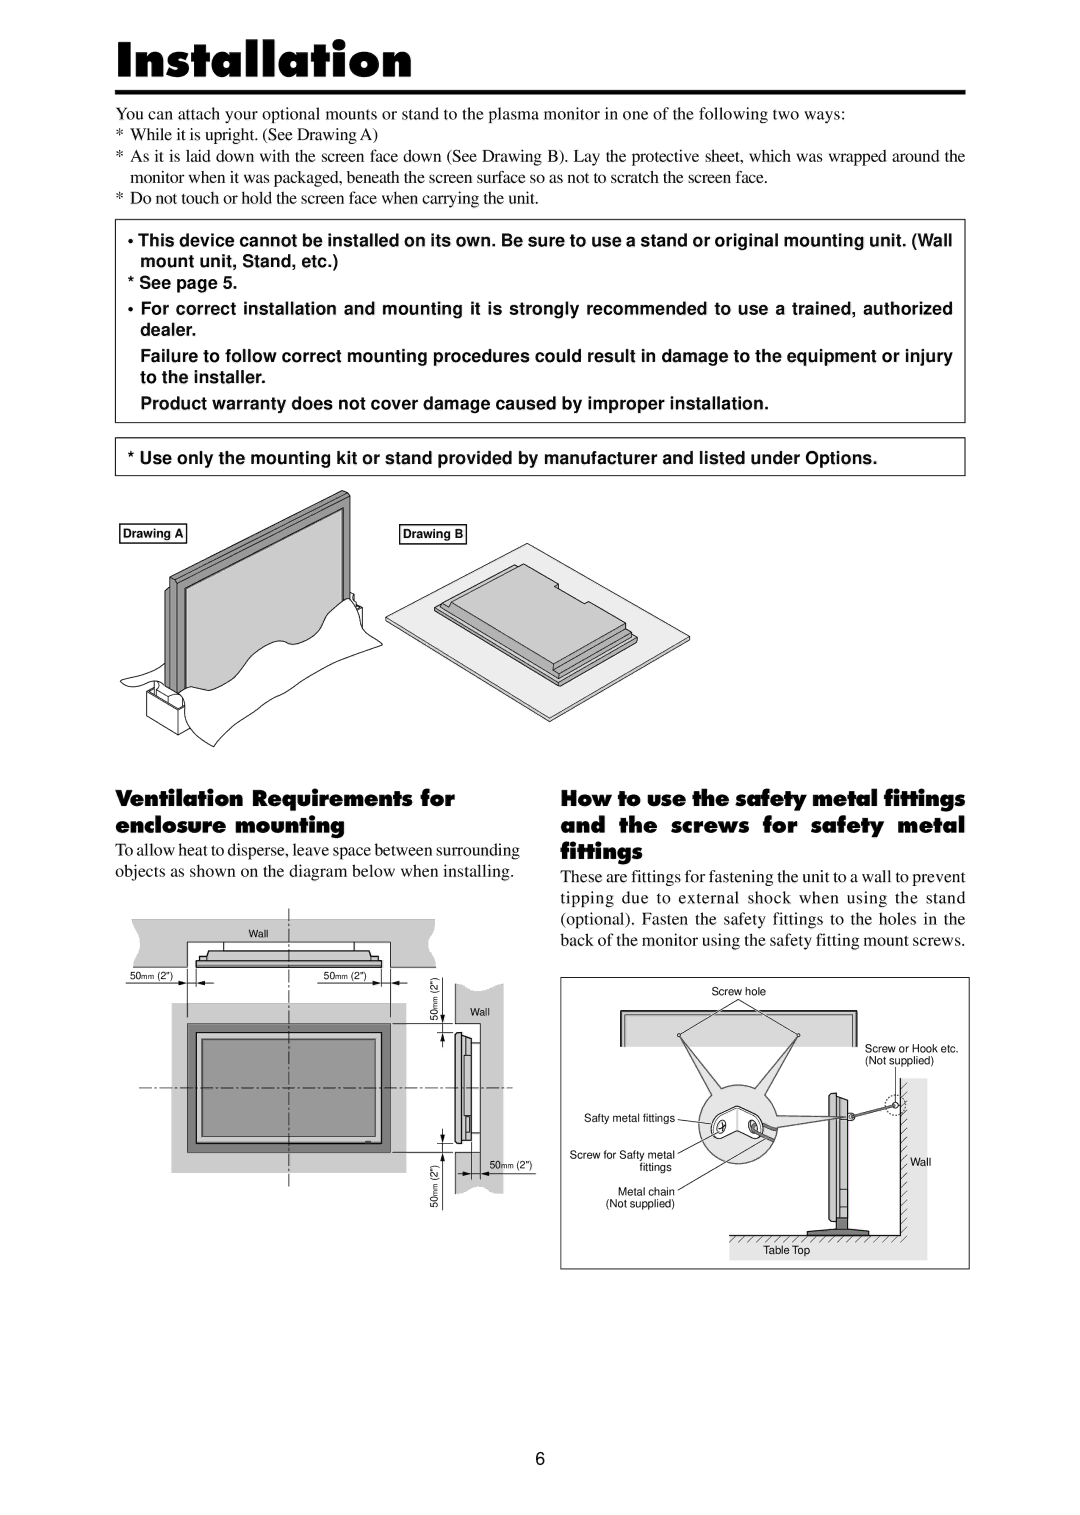 Dukane P42A specifications Installation, Ventilation Requirements for enclosure mounting 